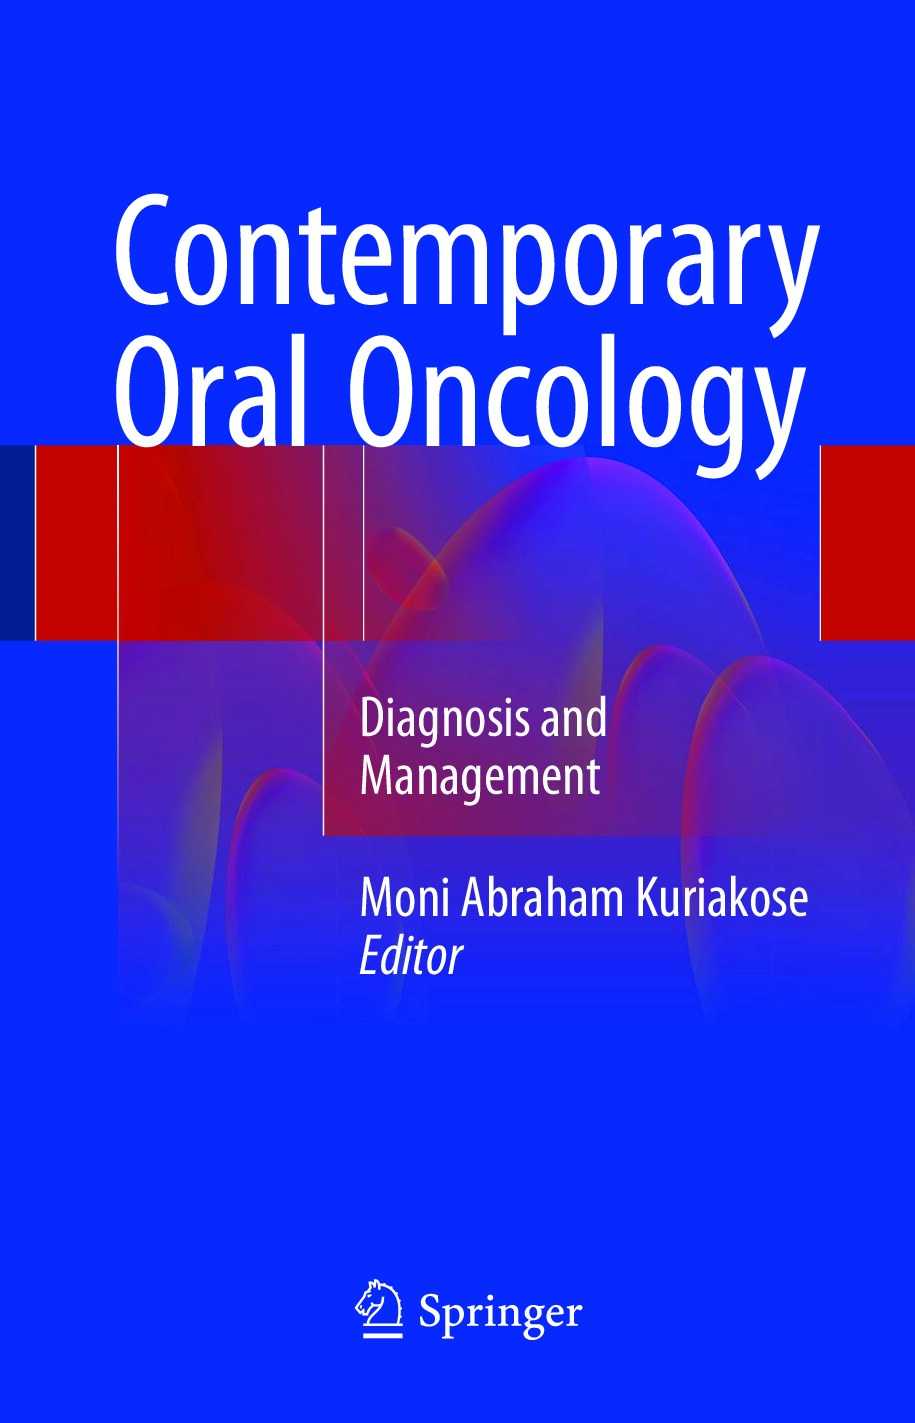 Contemporary Oral Oncology_ Diagnosis and Management (2017)